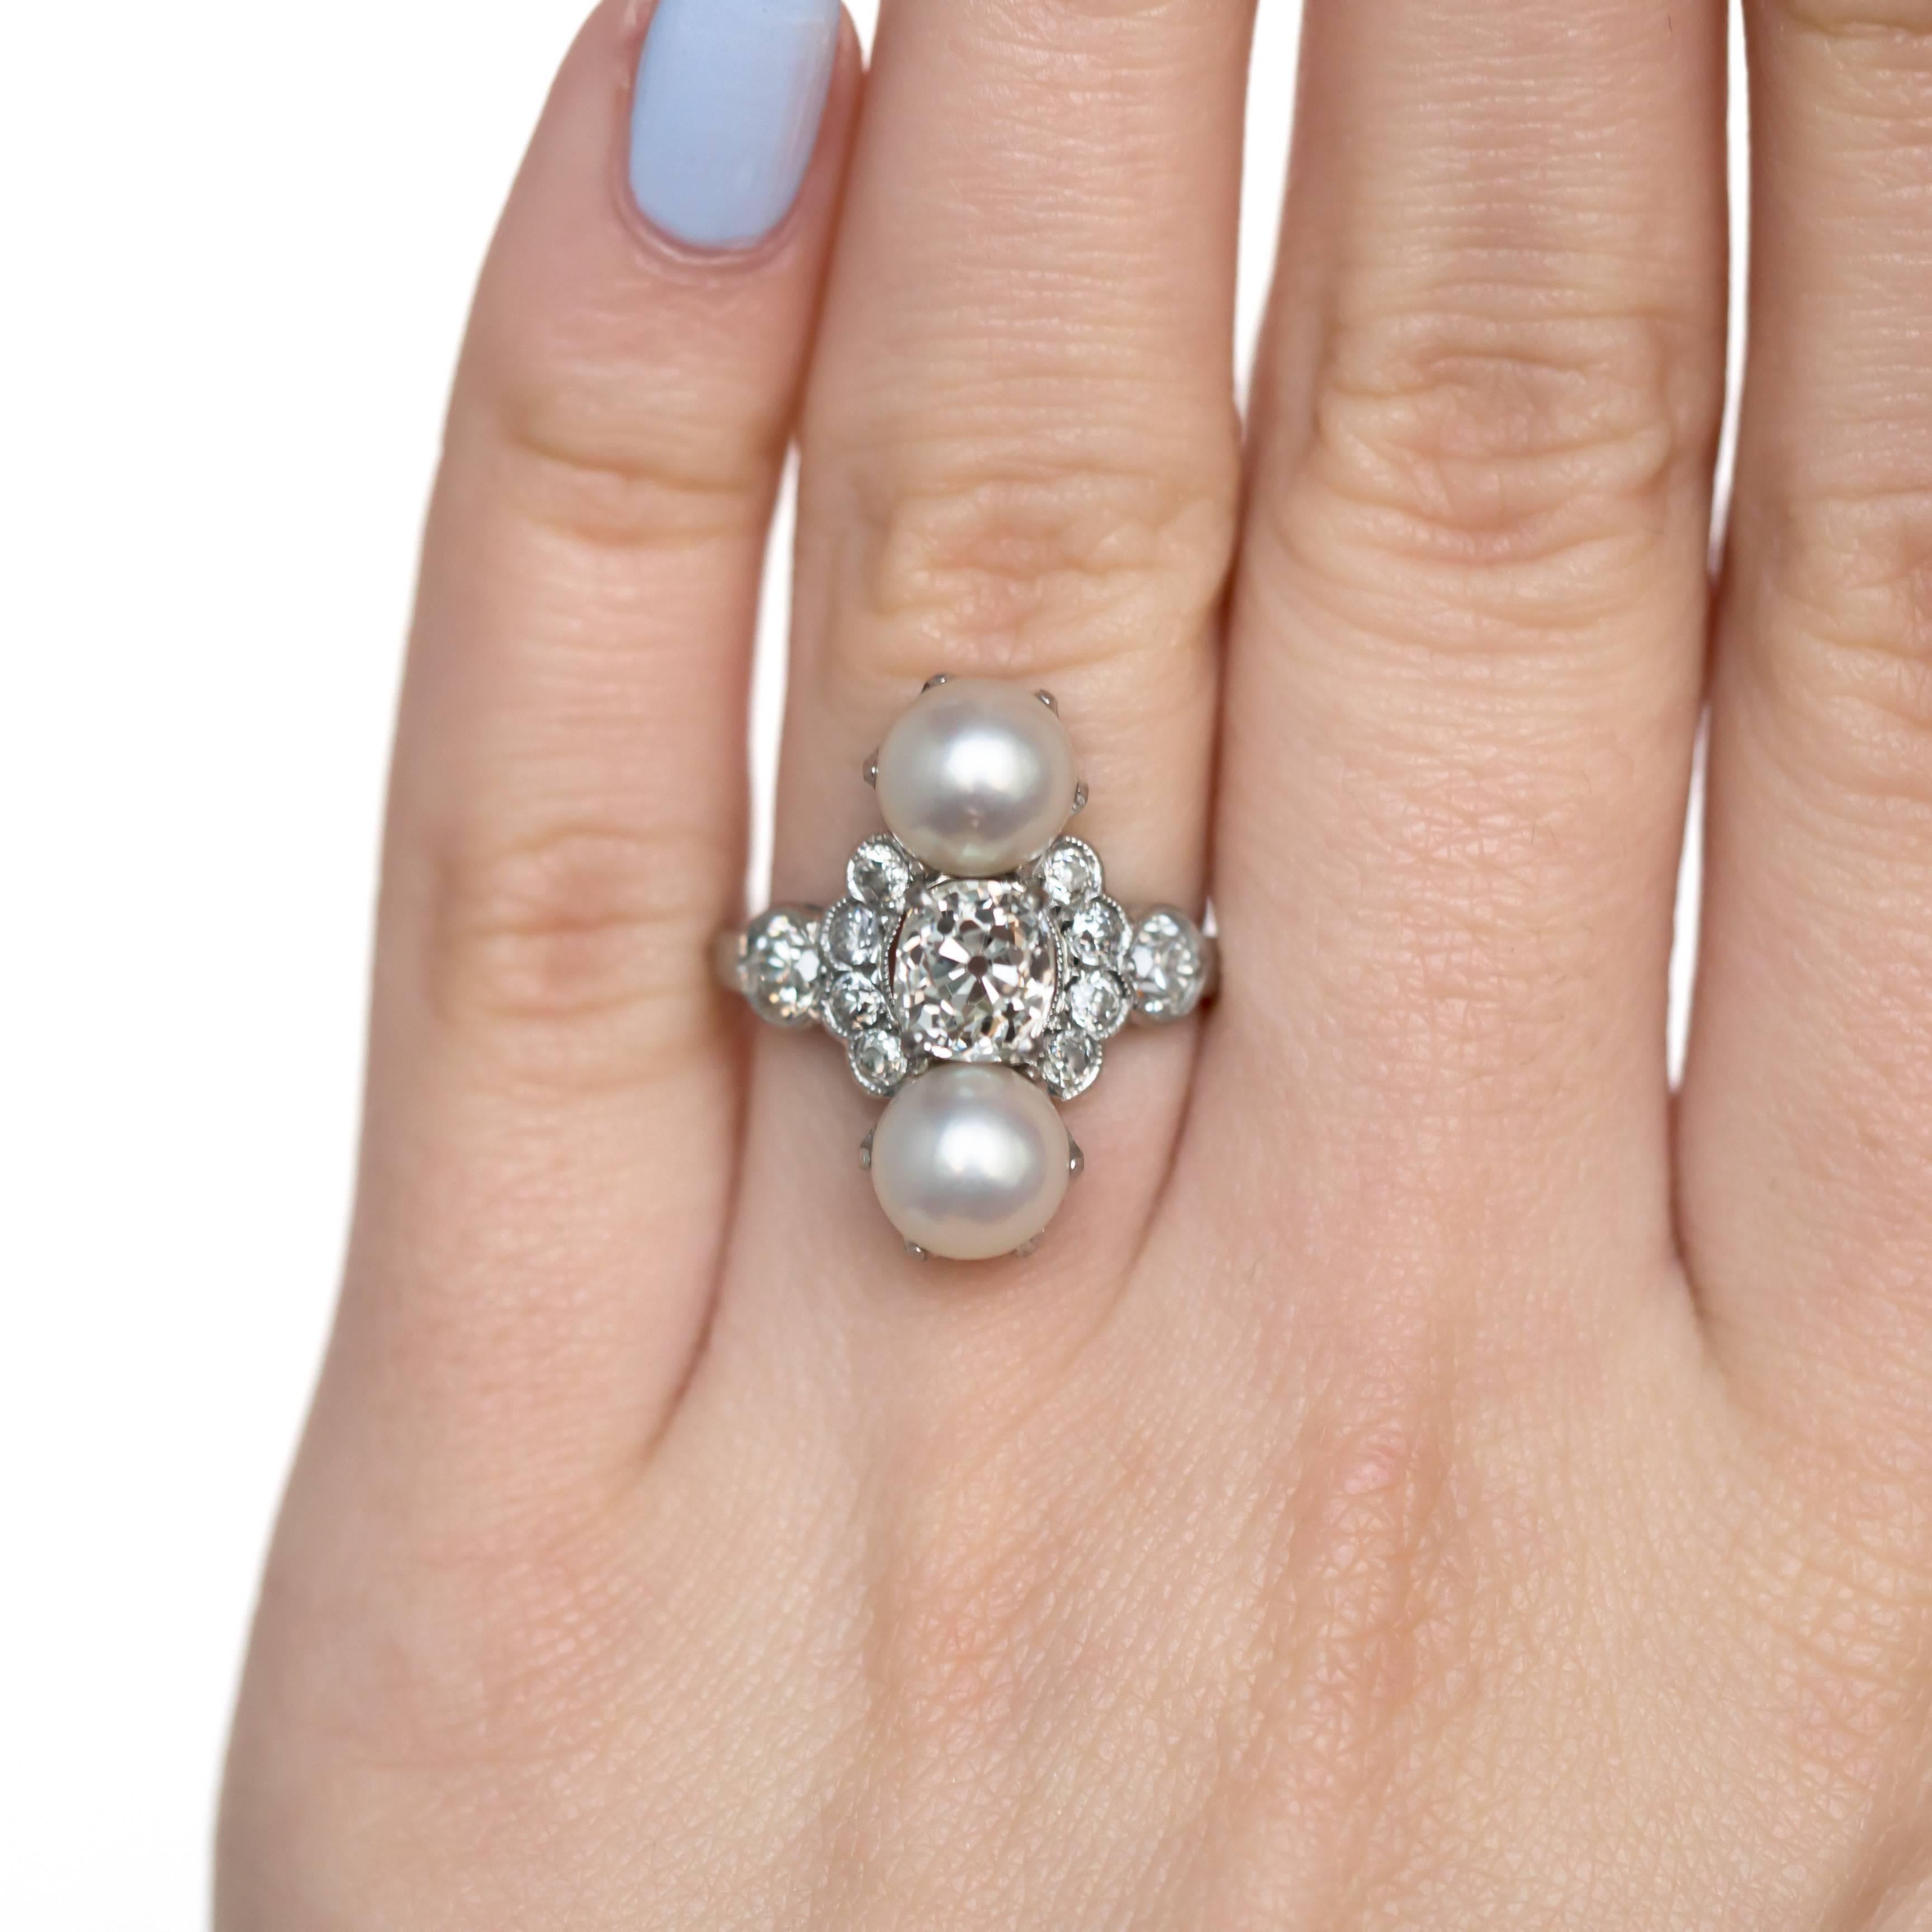 Women's GIA Certified 1.17 Carat Diamond and Pearl Platinum Engagement Ring